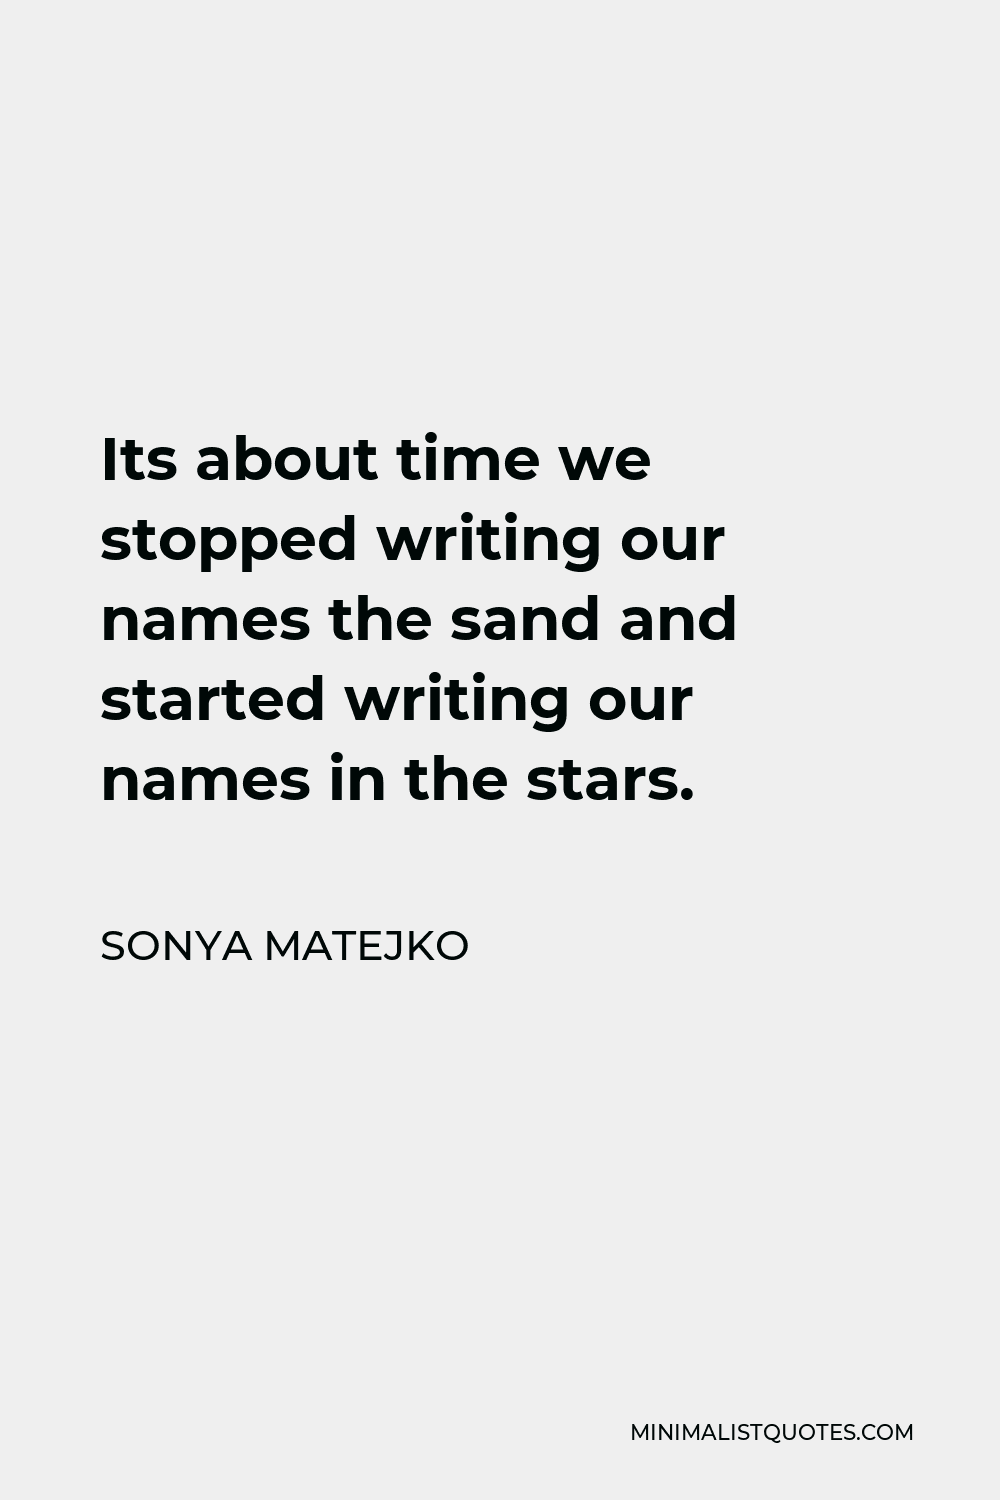 Sonya Matejko Quote - Its about time we stopped writing our names the sand and started writing our names in the stars.